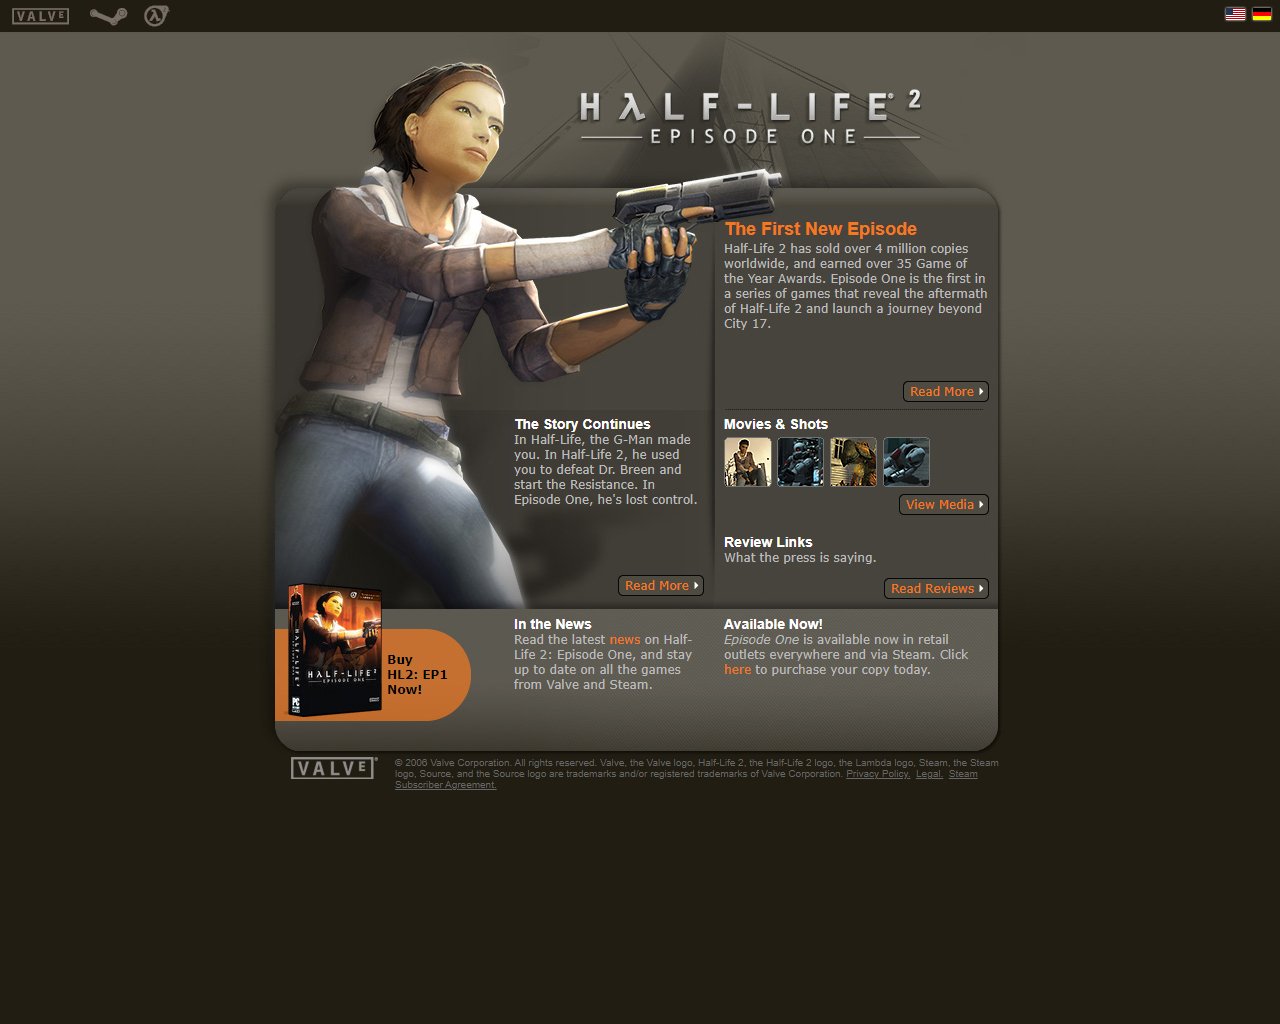 The Half-Life 2: Episode One website home page, circa June 2006 to 2007. Virtually identical to how it was before, but with an indication that Episode One is available now.